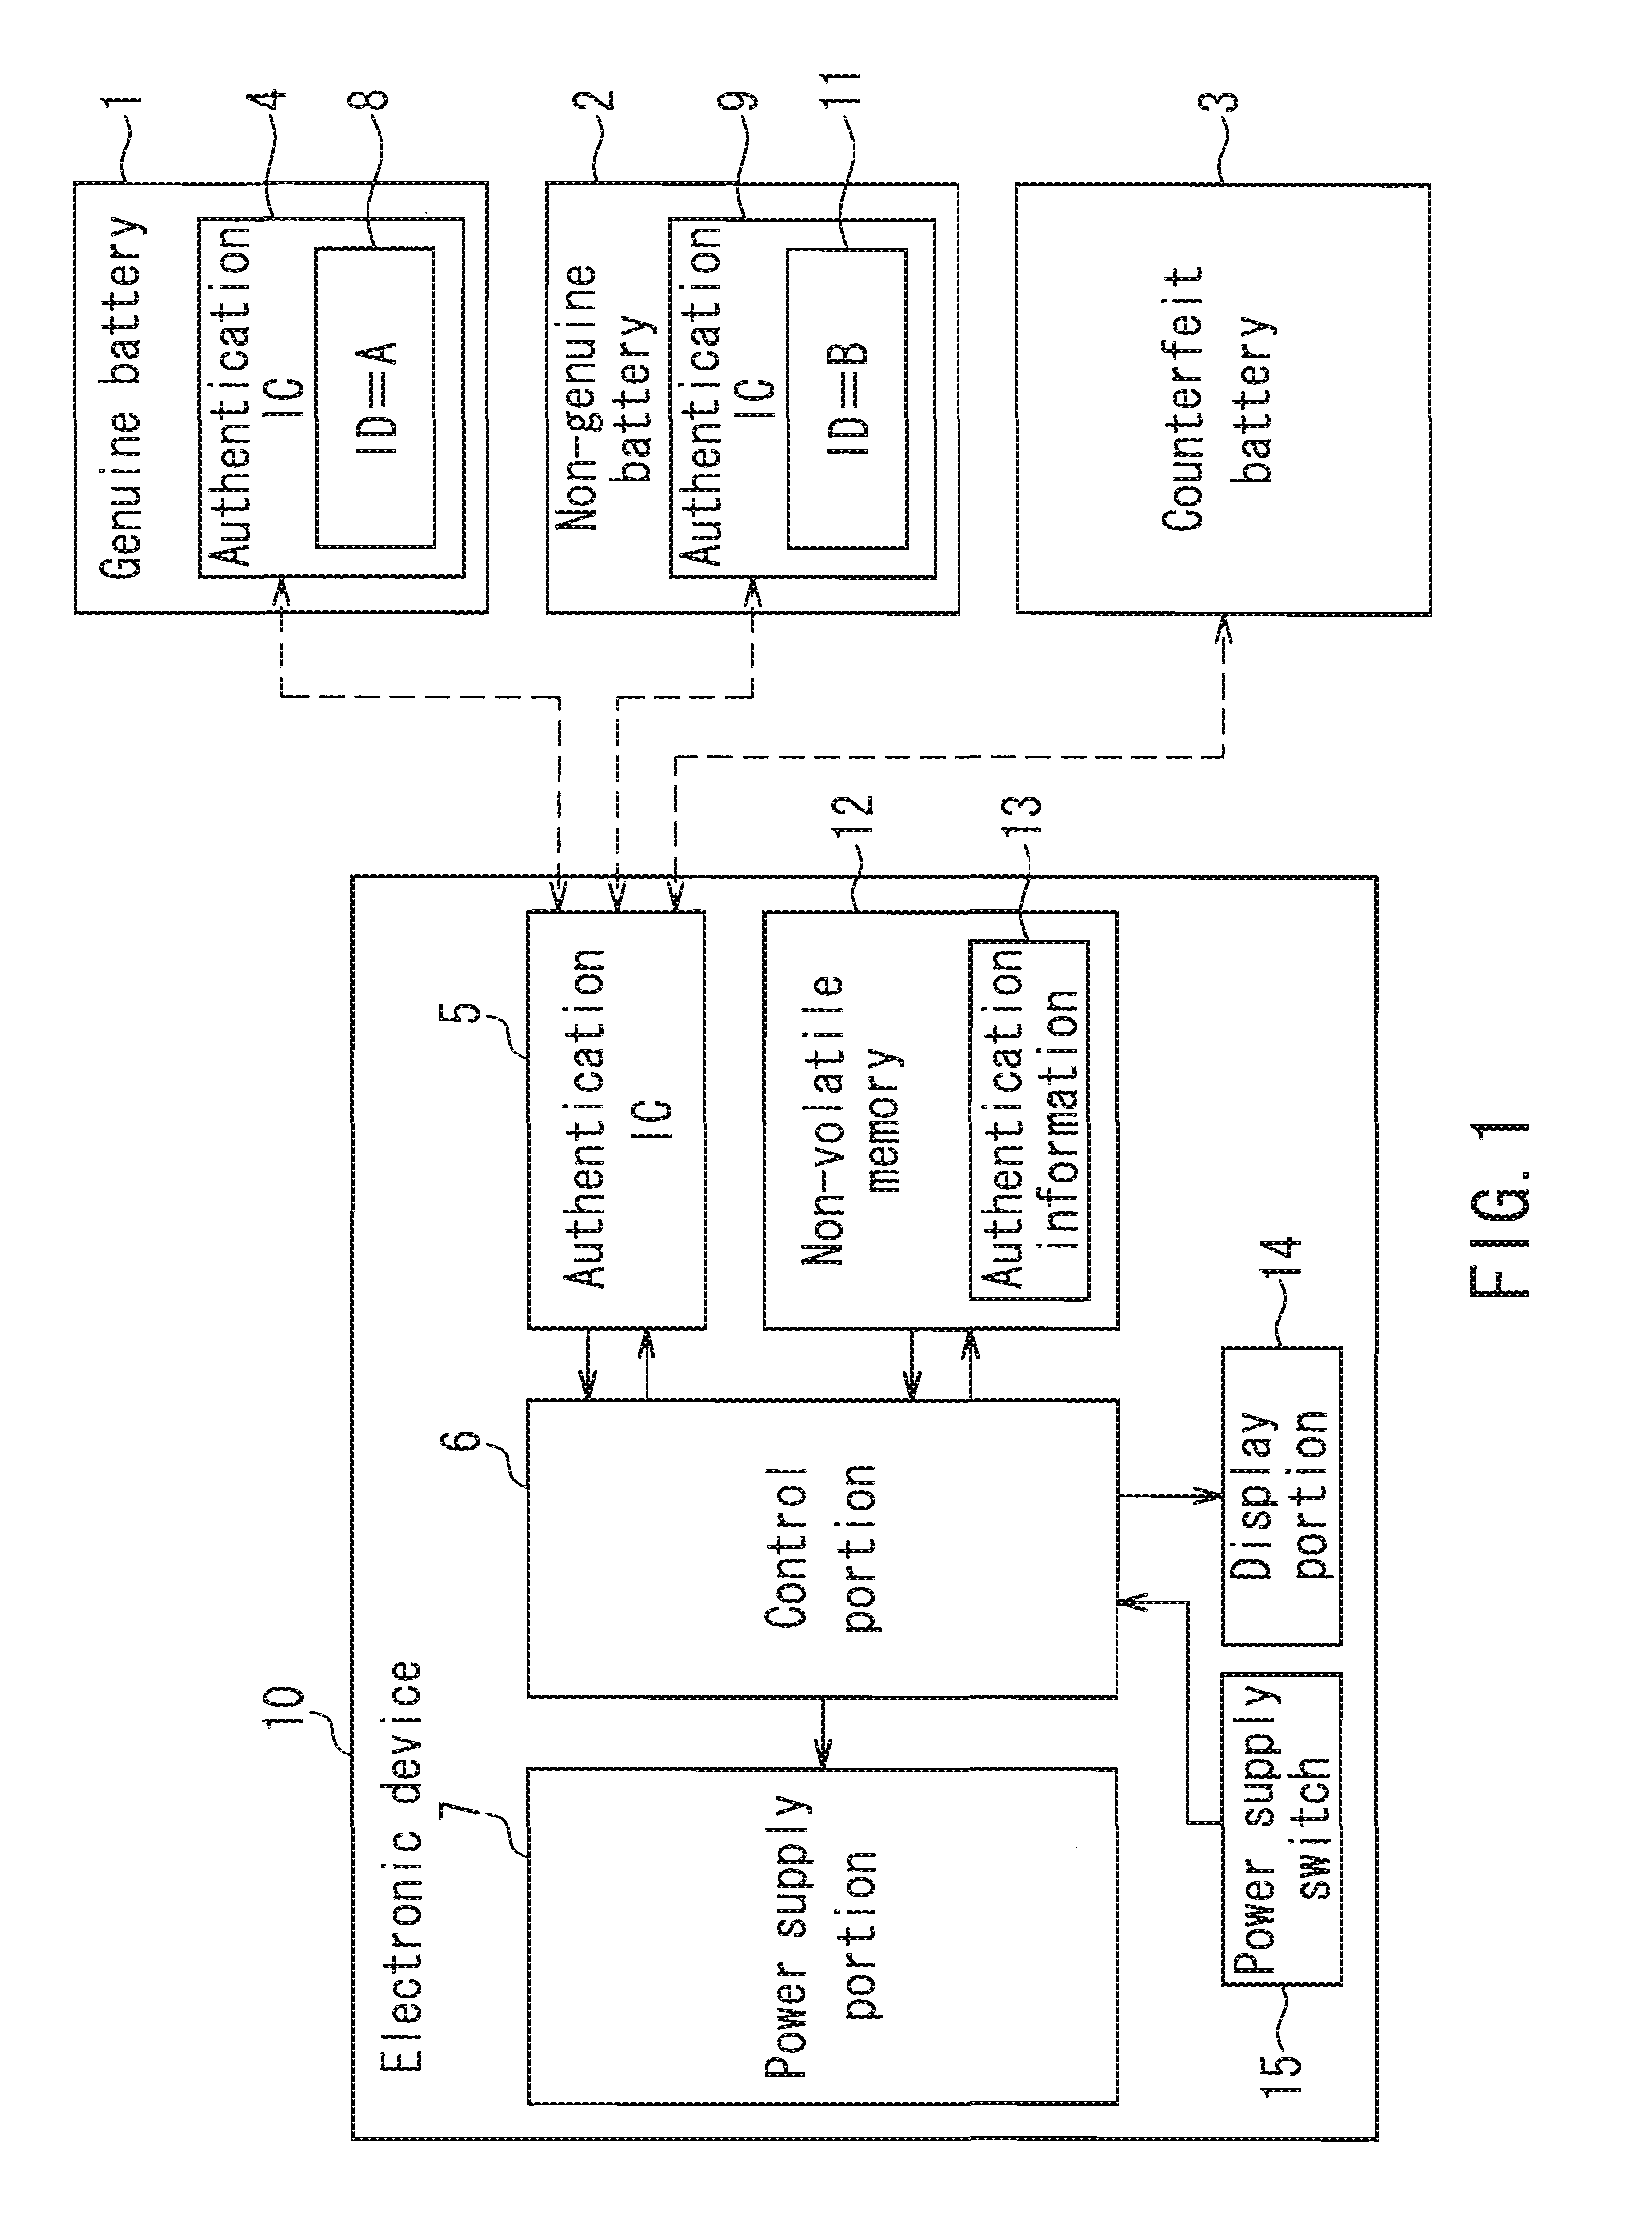 Battery authentication system, electronic device, battery, and battery charger